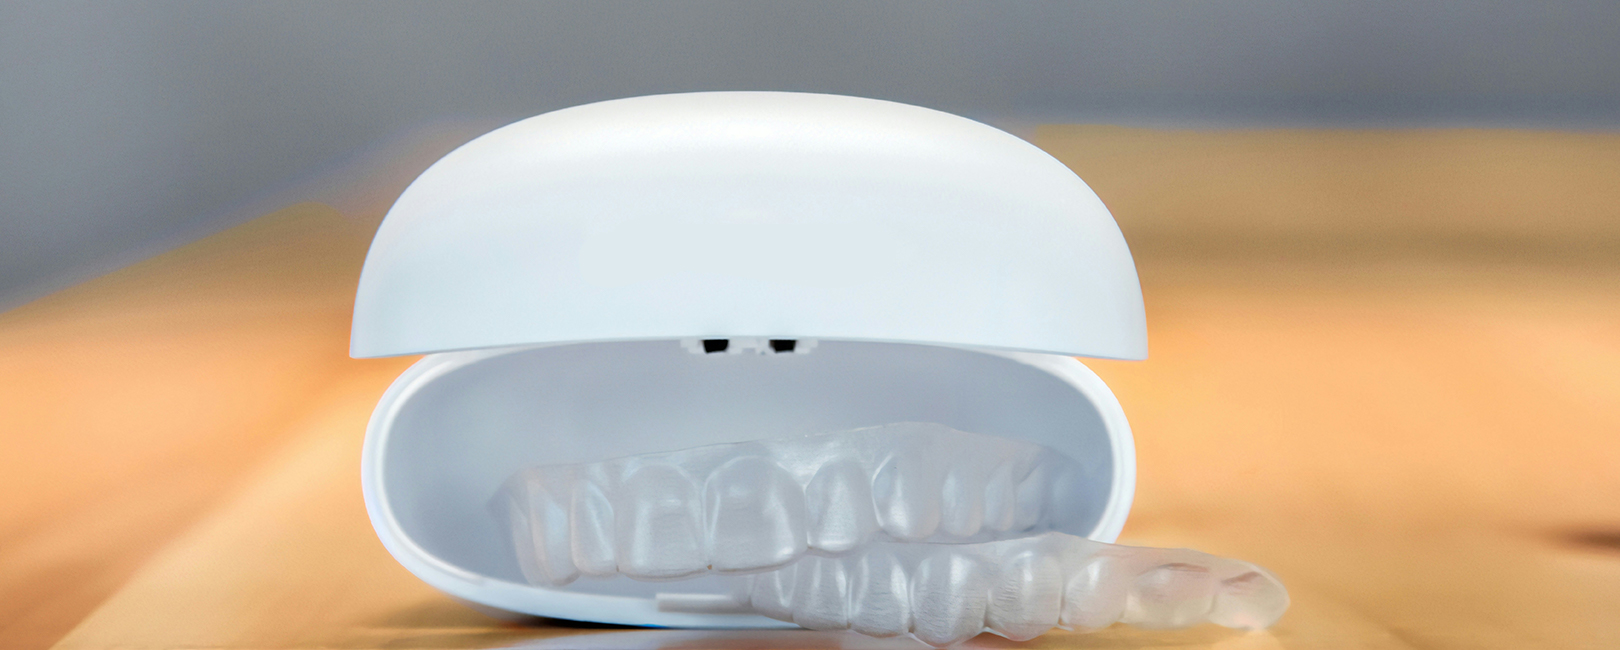 A white braces case with a clear transparent braces in it lain on a wooden table.